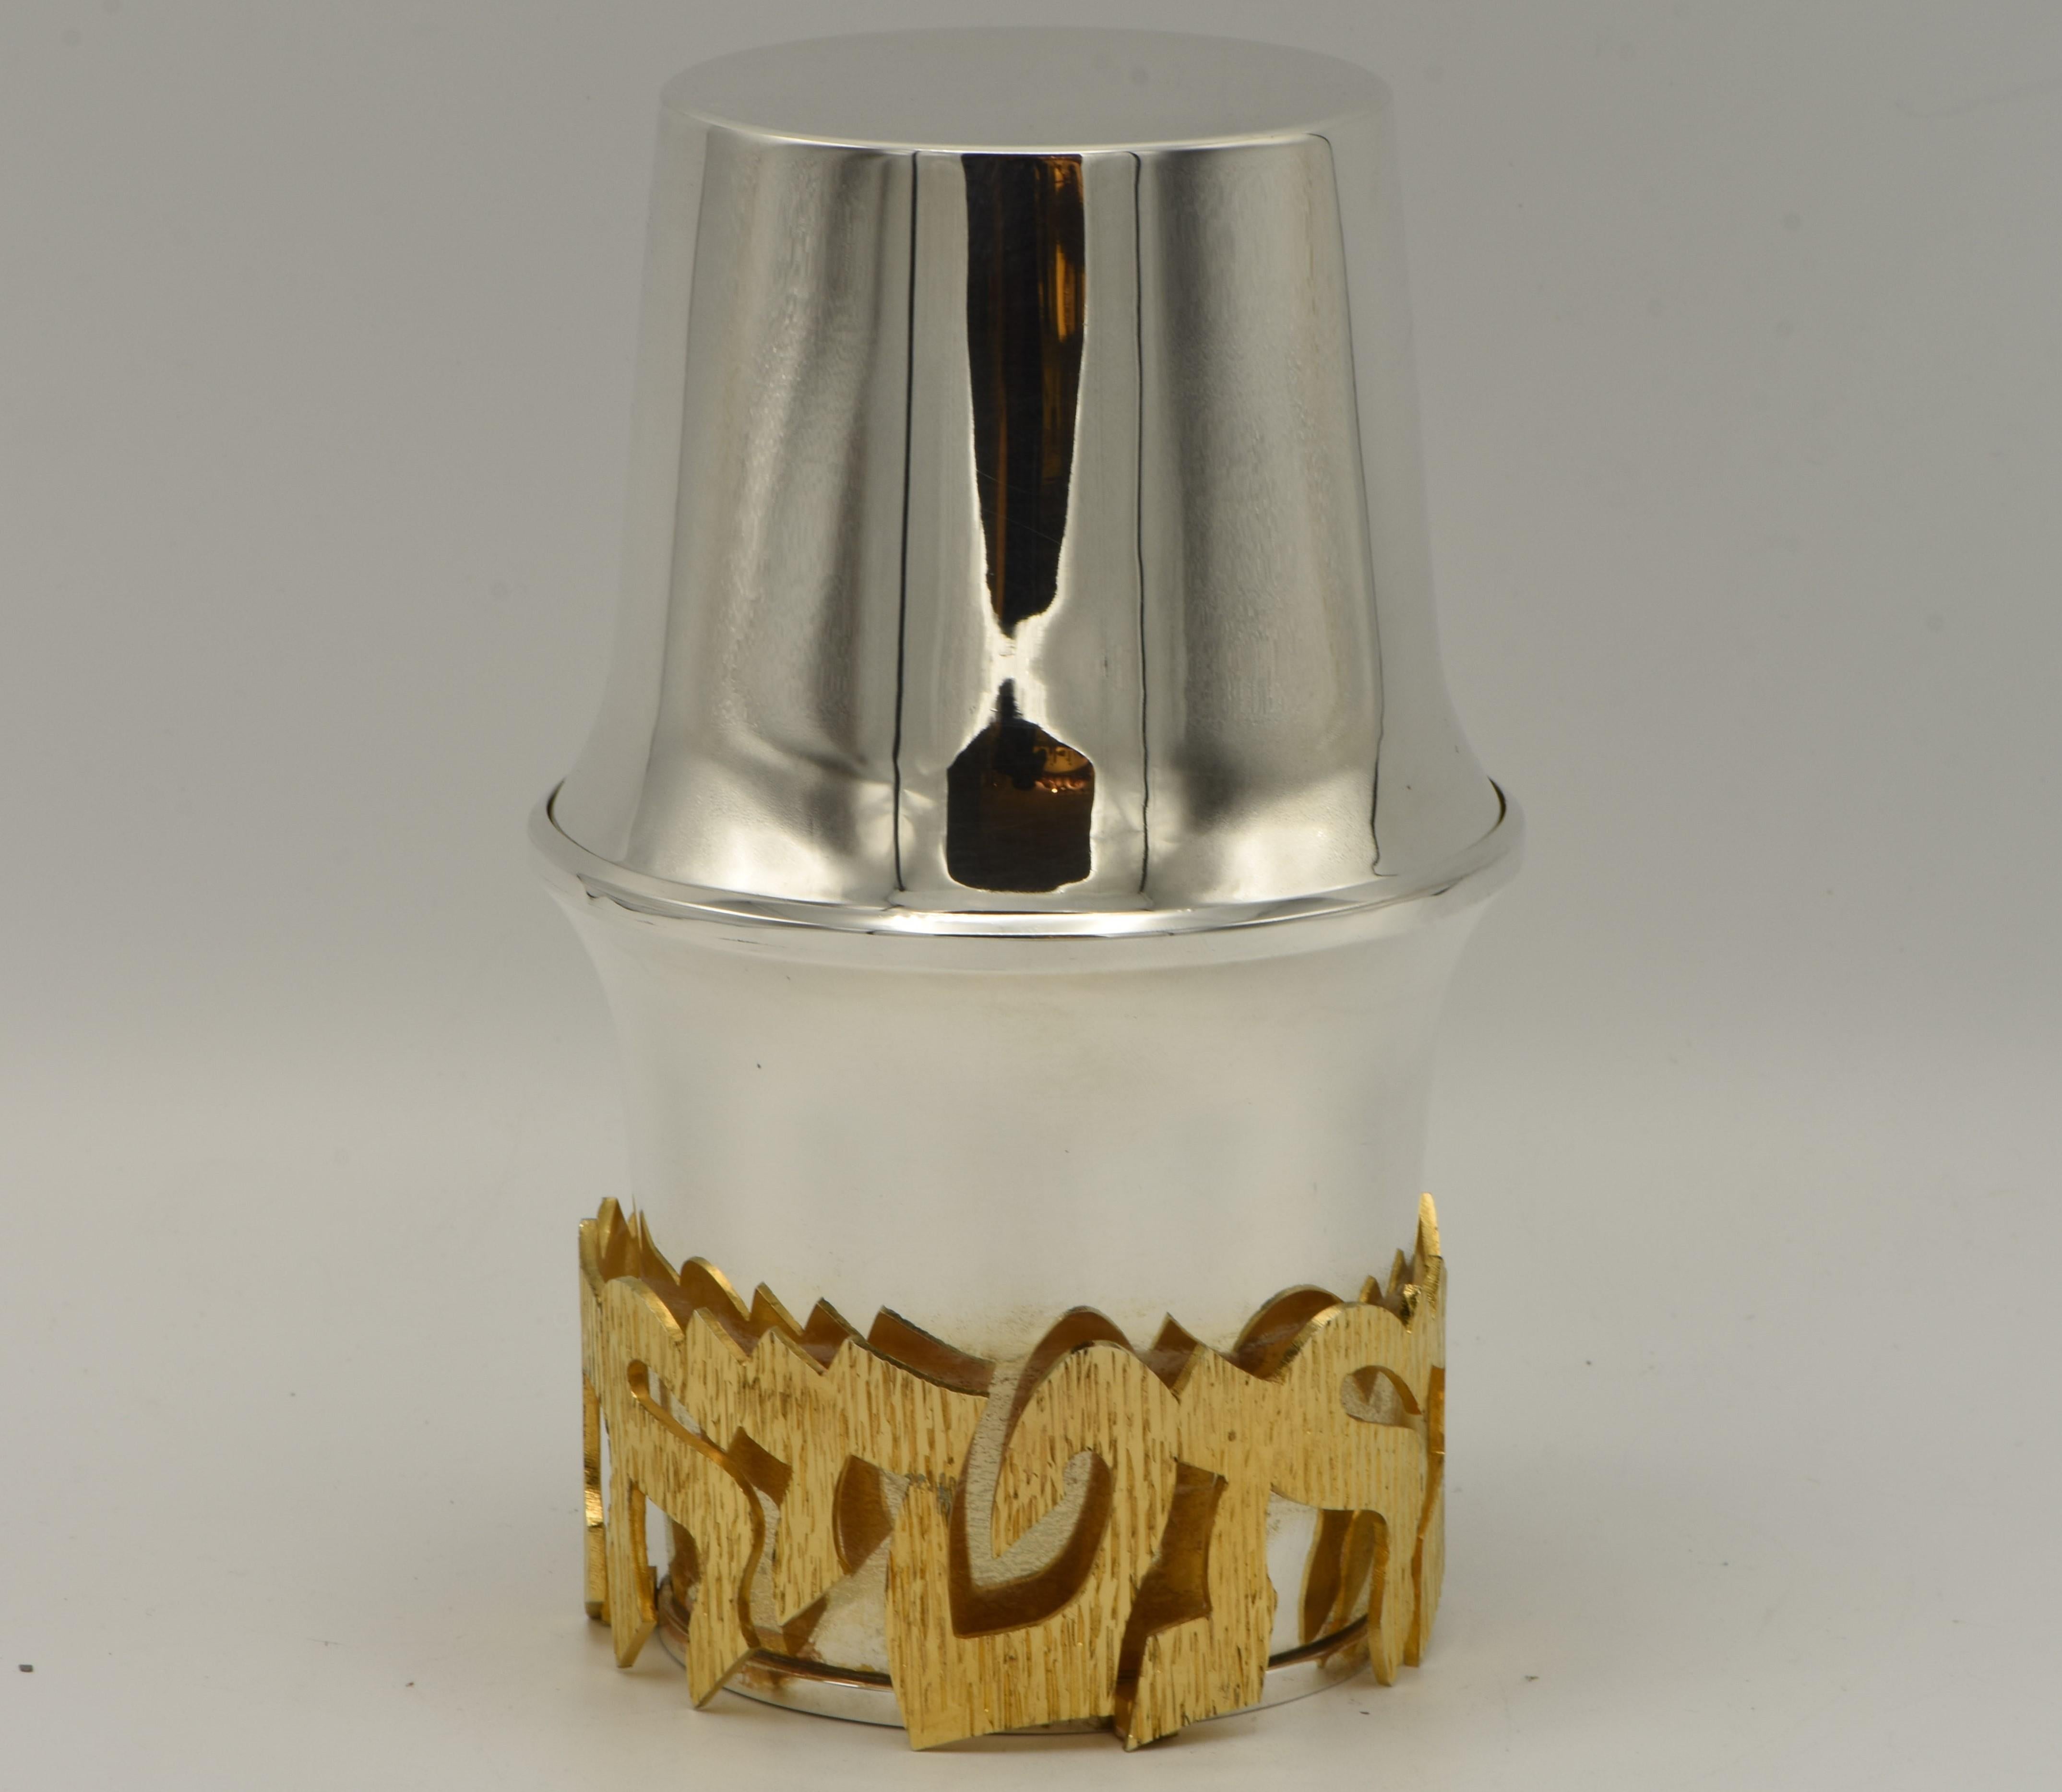 Large sterling silver Etrog container by Carmel shabi, Jerusalem, 1985. 
With removable top in modern form. Buttom portion with gilded silver band bearing the prayer on the Lulav.
 